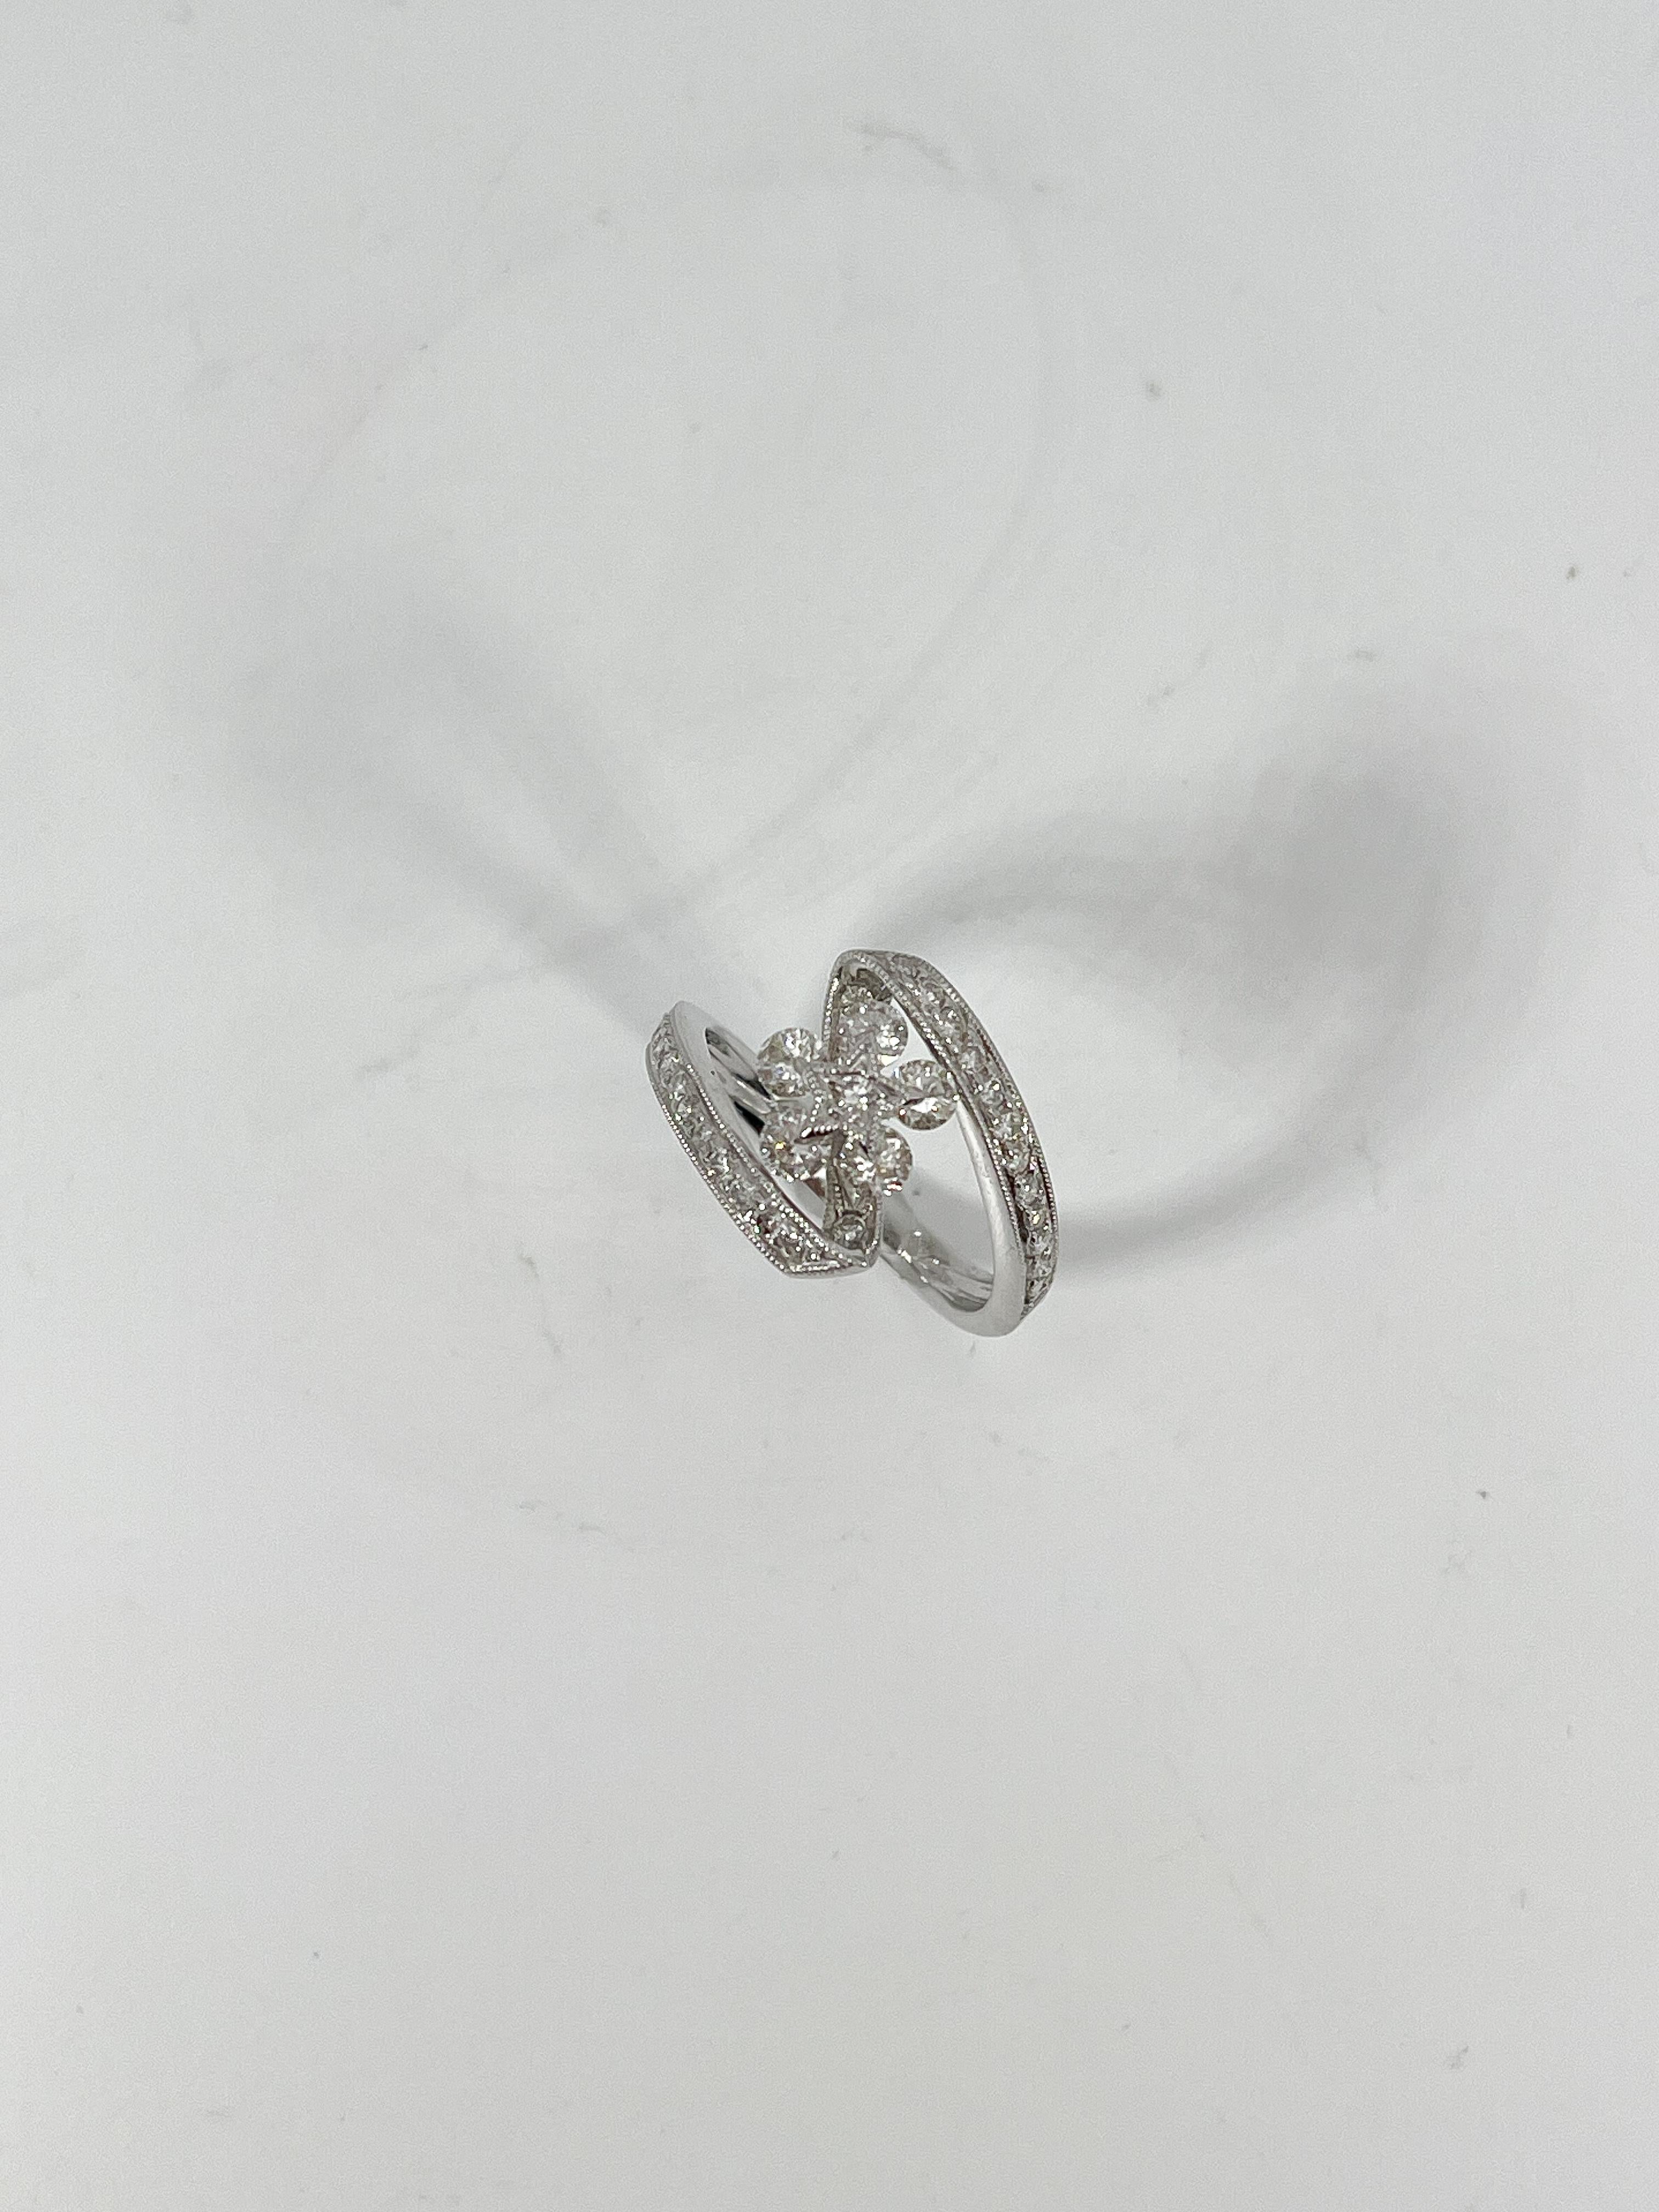 18k white gold 1 CTW diamond flower fashion ring. The stones in this ring are all round, ring is a size 6 1/2, the ring measures 13.3mm x 8mm, and has a total weight of 4.4 grams.